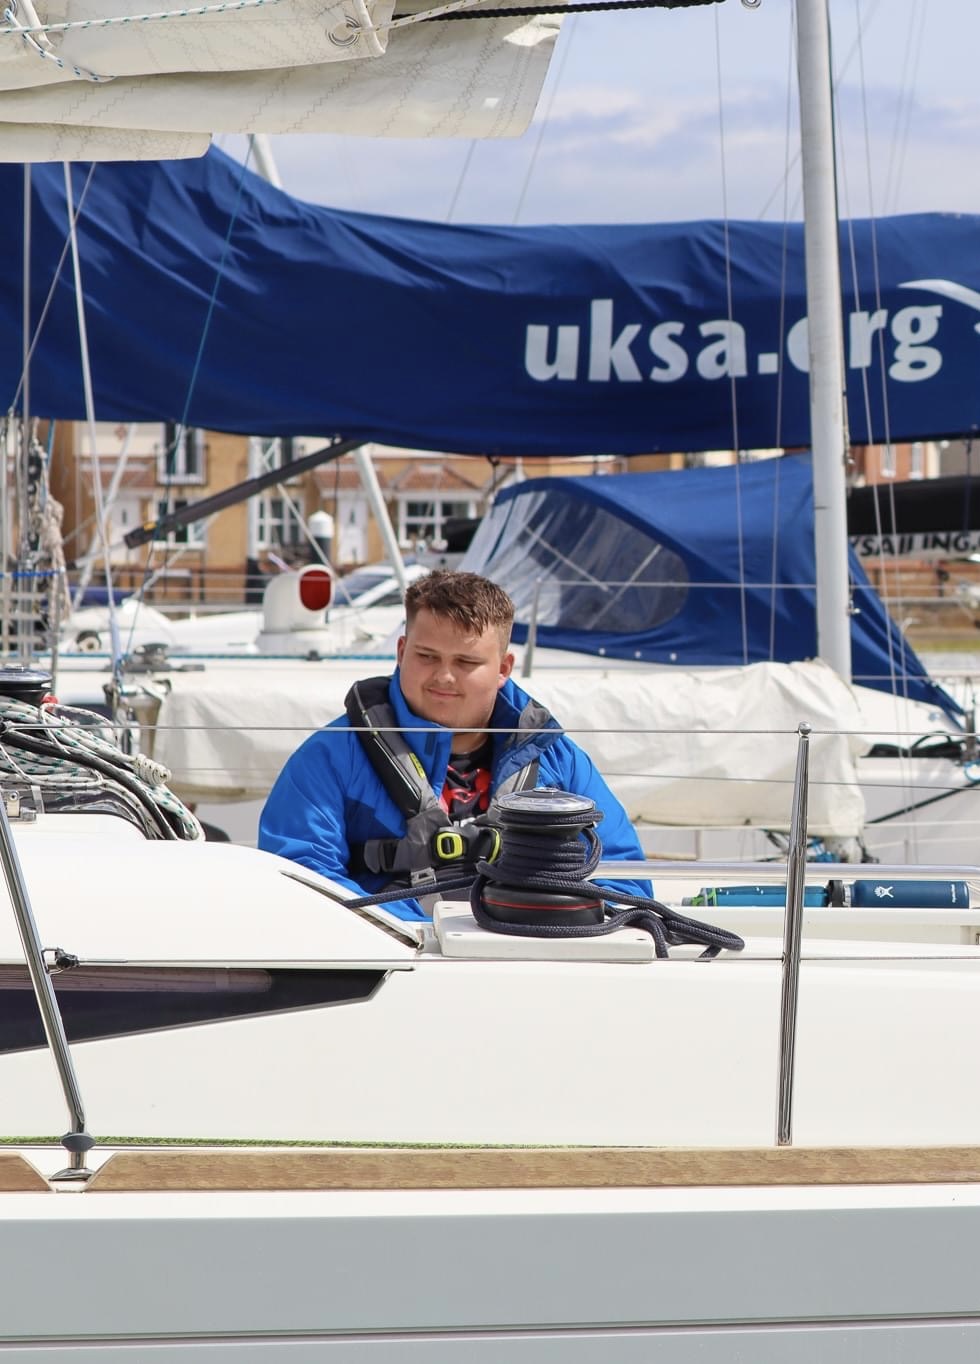 Lloyd Sakr, Lancashire SLC member, pictured on a sail boat, sitting under the sail. He is wearing a blue jacket and black life jacket.